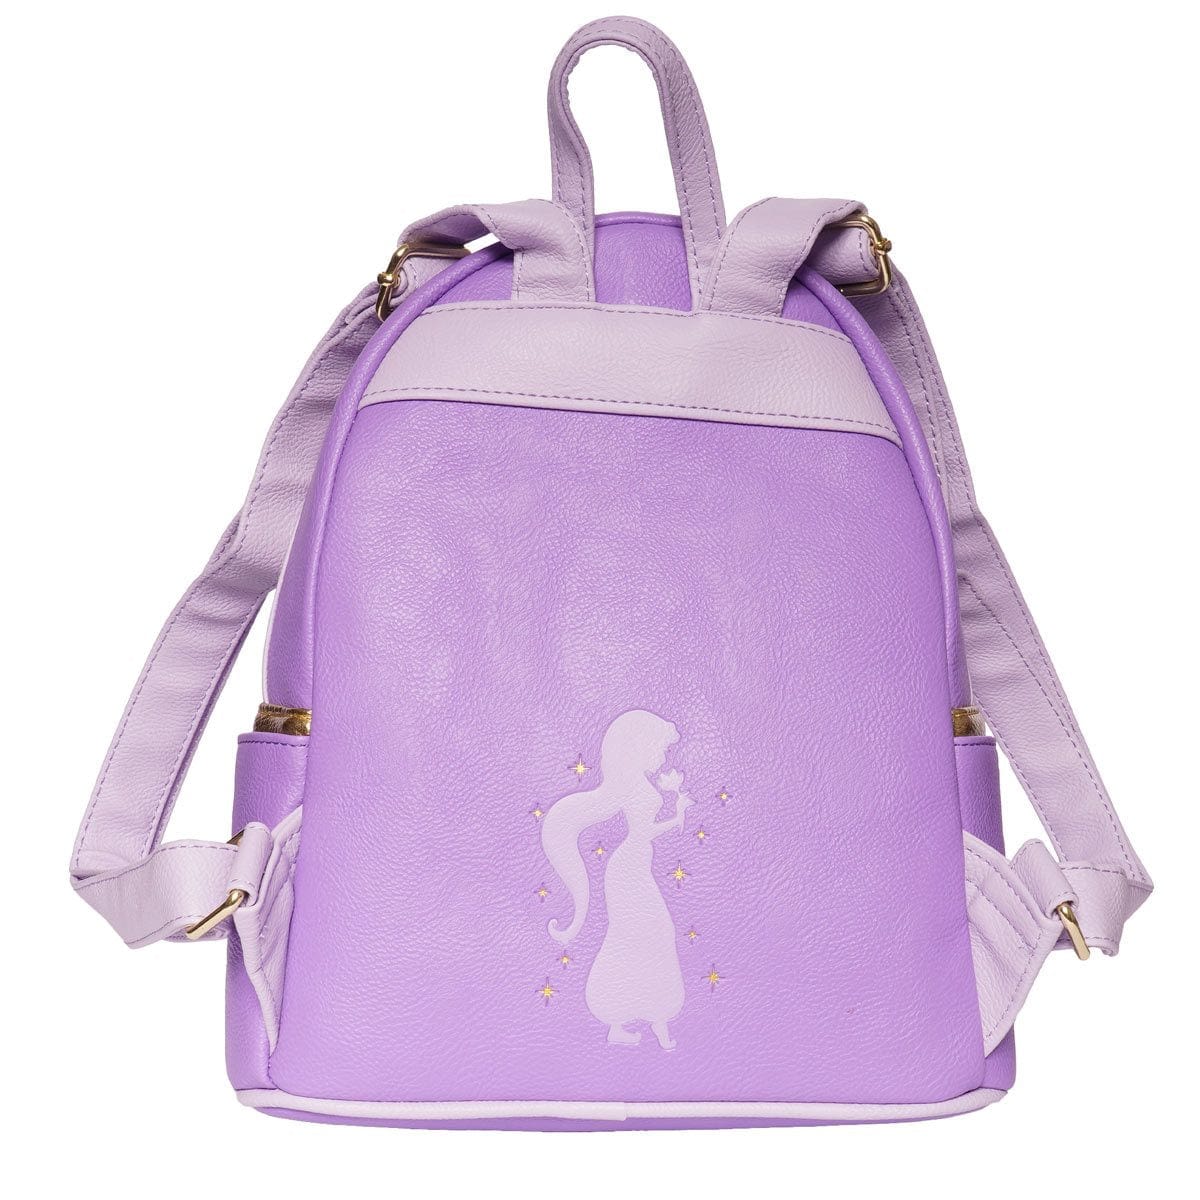 Aladdin Princess Jasmine Purple Outfit Cosplay Mini-Backpack - Entertainment Earth Exclusive